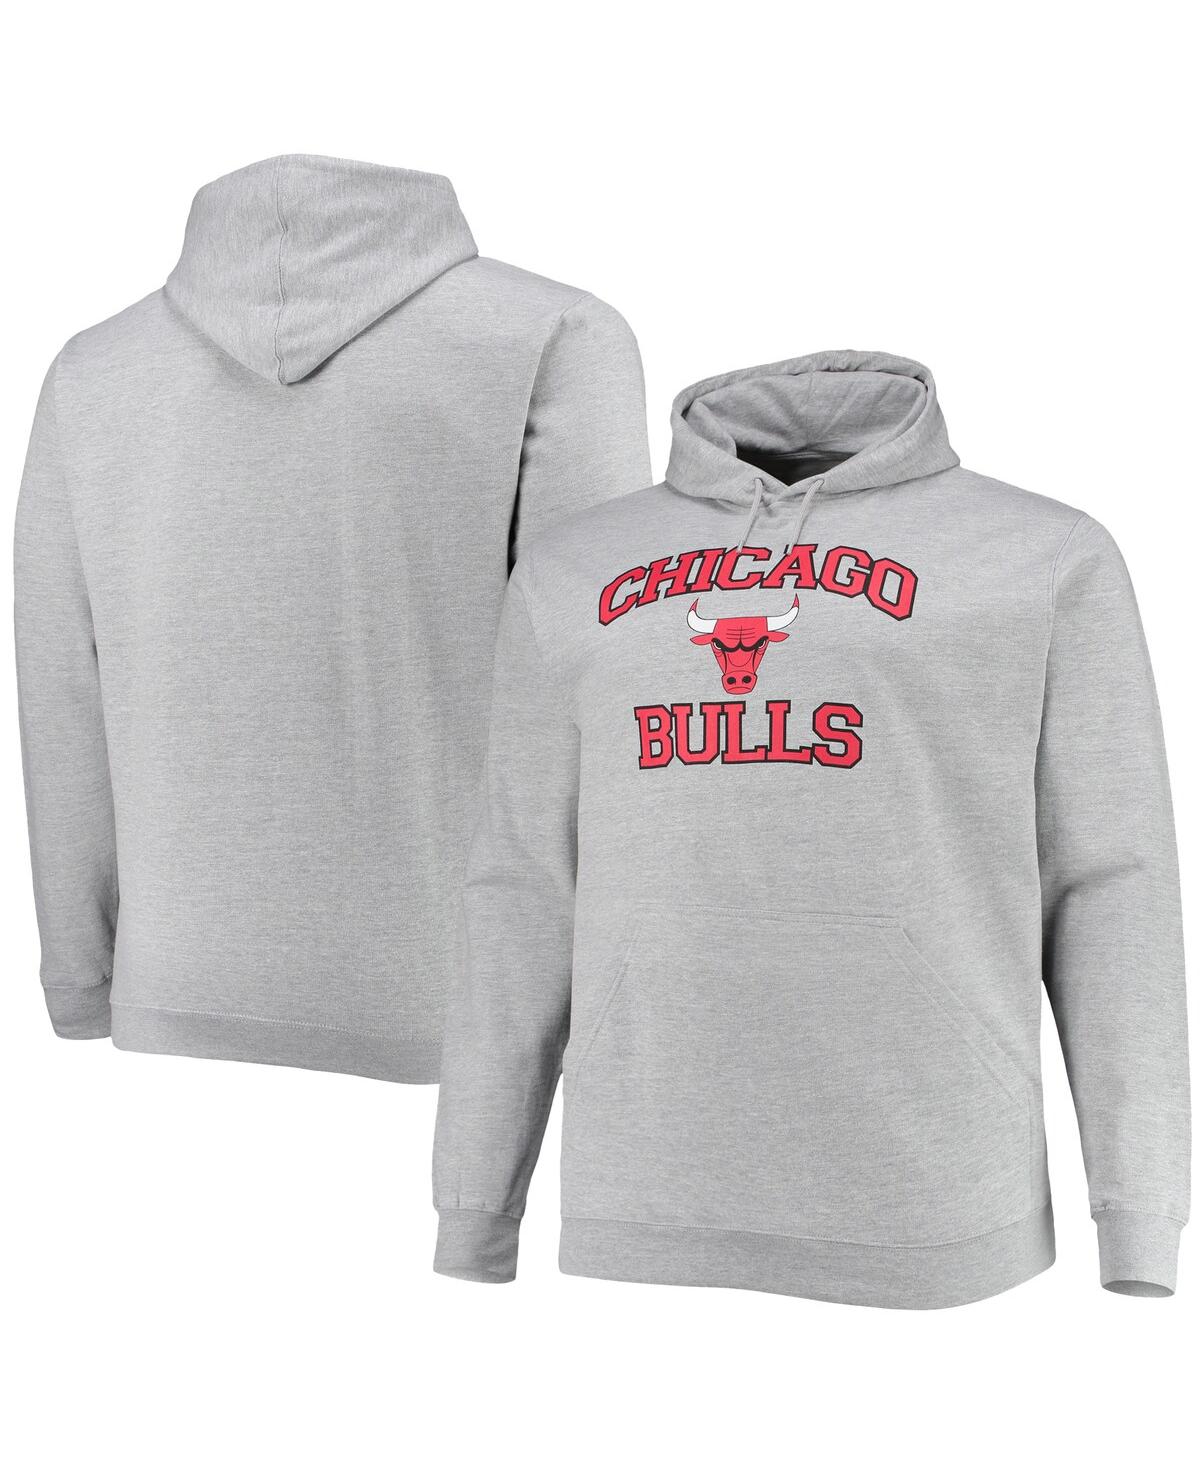 Men's Heathered Gray Chicago Bulls Big and Tall Heart and Soul Pullover Hoodie - Heathered Gray